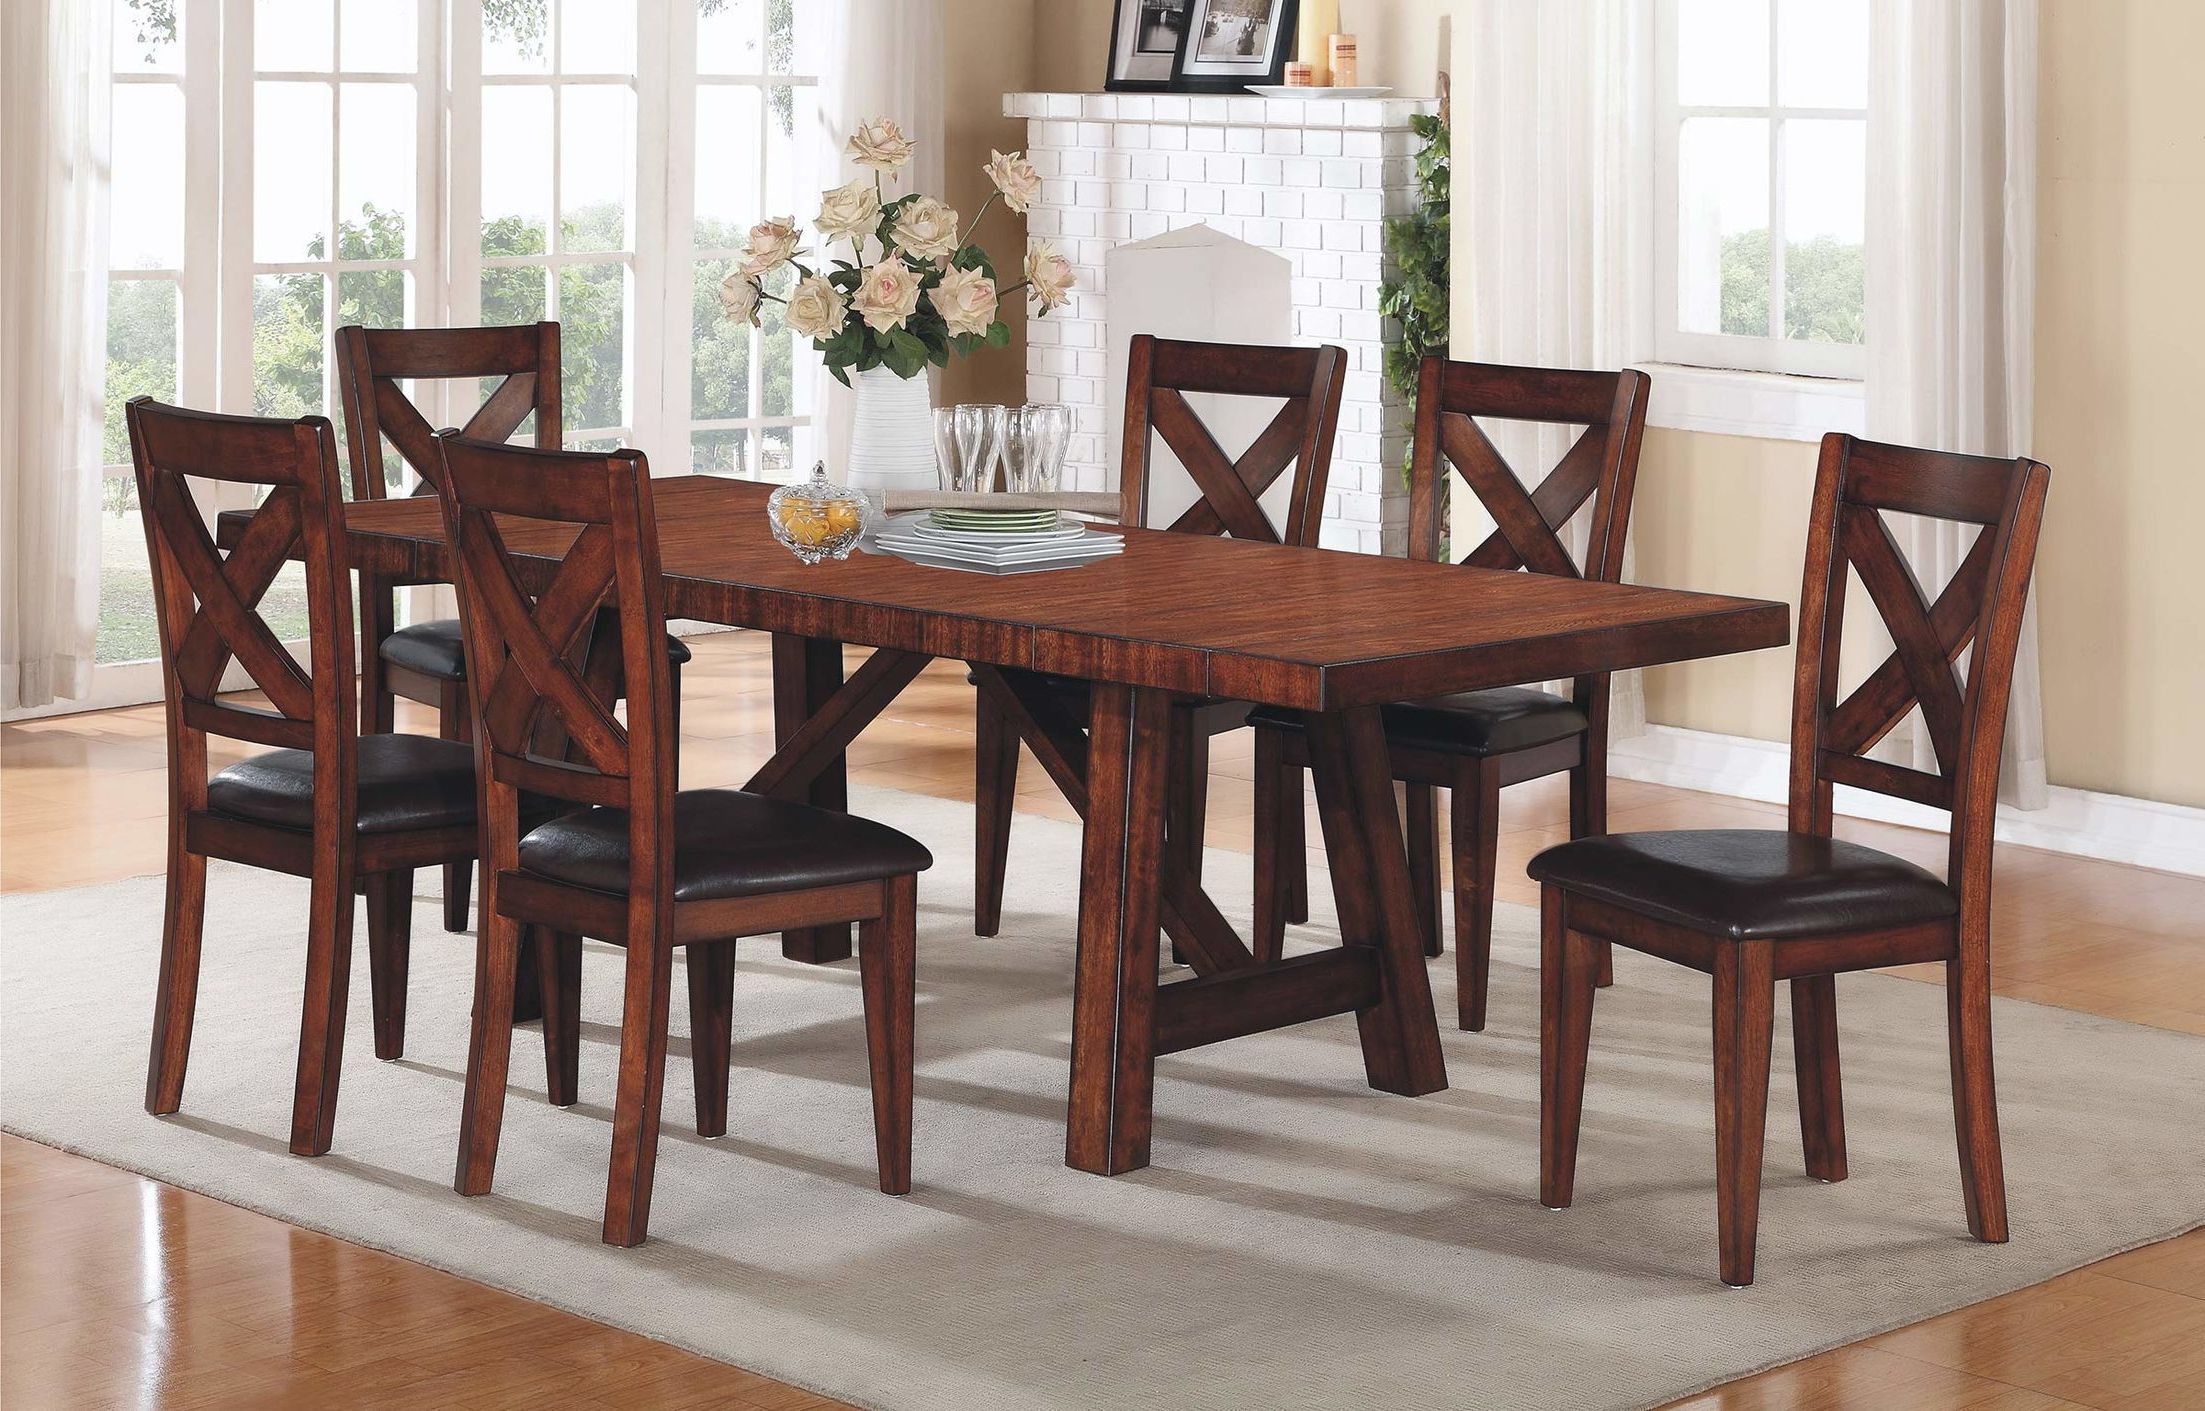 Dining Room Sets, Dining Table With Regard To Most Current 7 Piece Extendable Dining Sets (View 1 of 15)